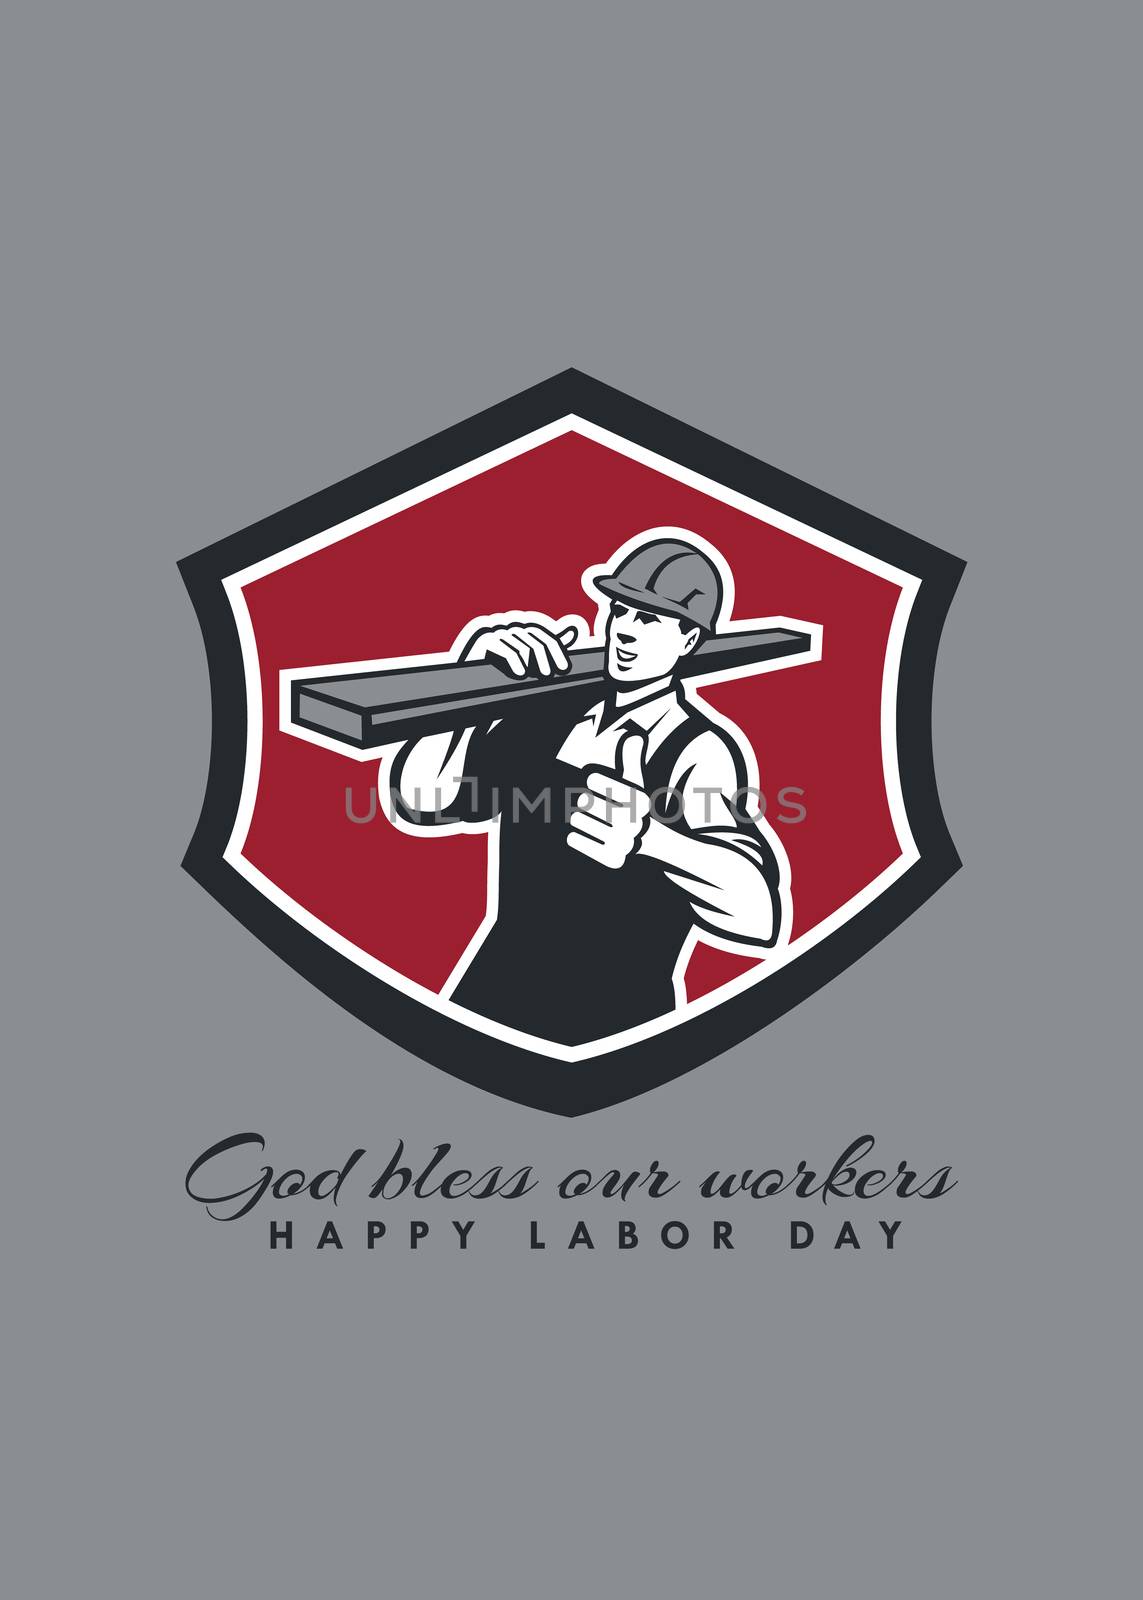 Labor Day greeting card featuring an illustration of a carpenter builder construction worker carrying lumber on shoulder doing a thumbs up set inside shield crest on isolated background done in retro style with the words God Bless Our Workers, Happy Labor Day.